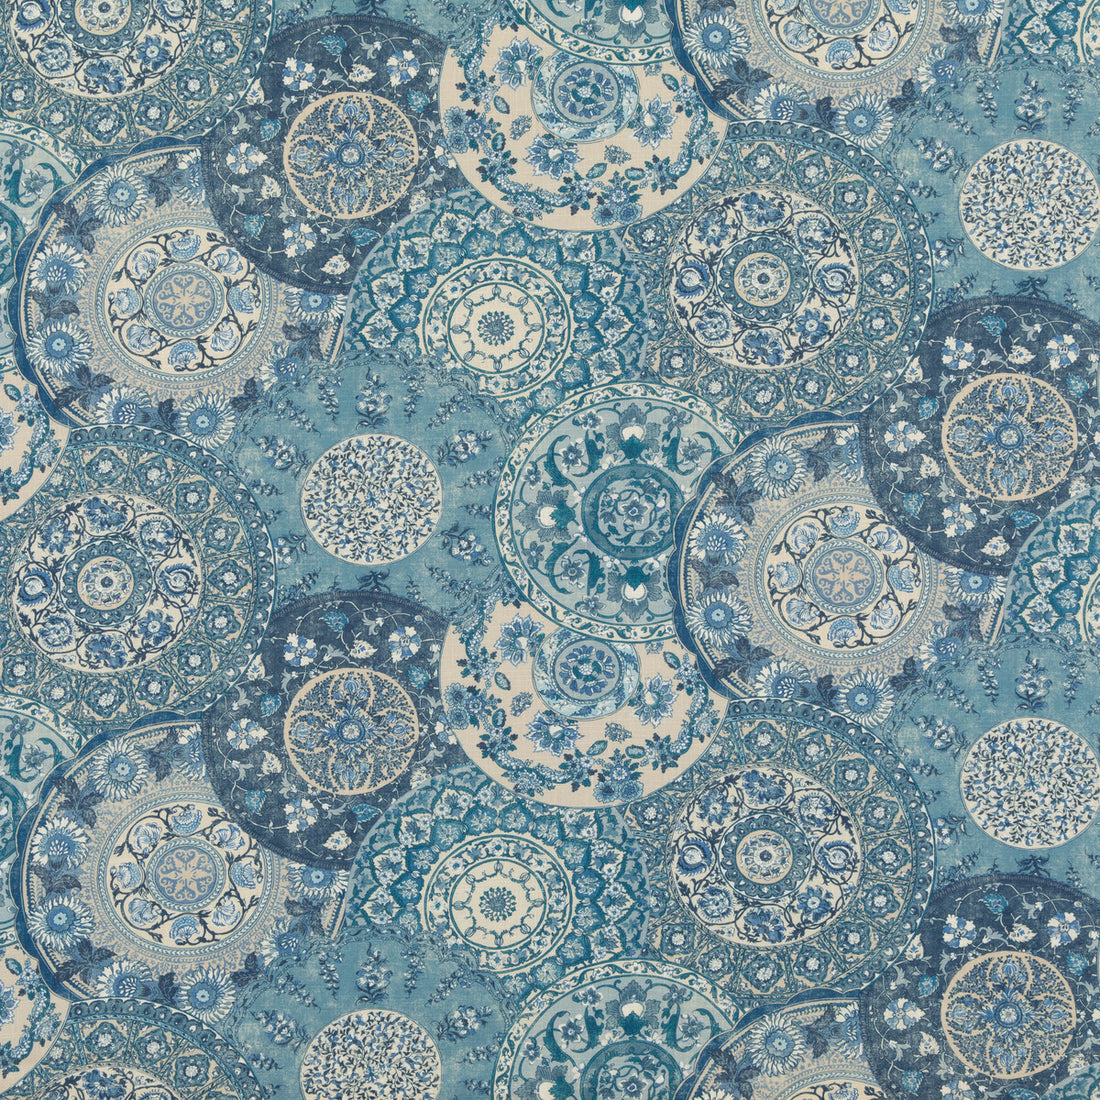 Imari fabric in blue color - pattern BP10856.1.0 - by G P &amp; J Baker in the Chifu collection